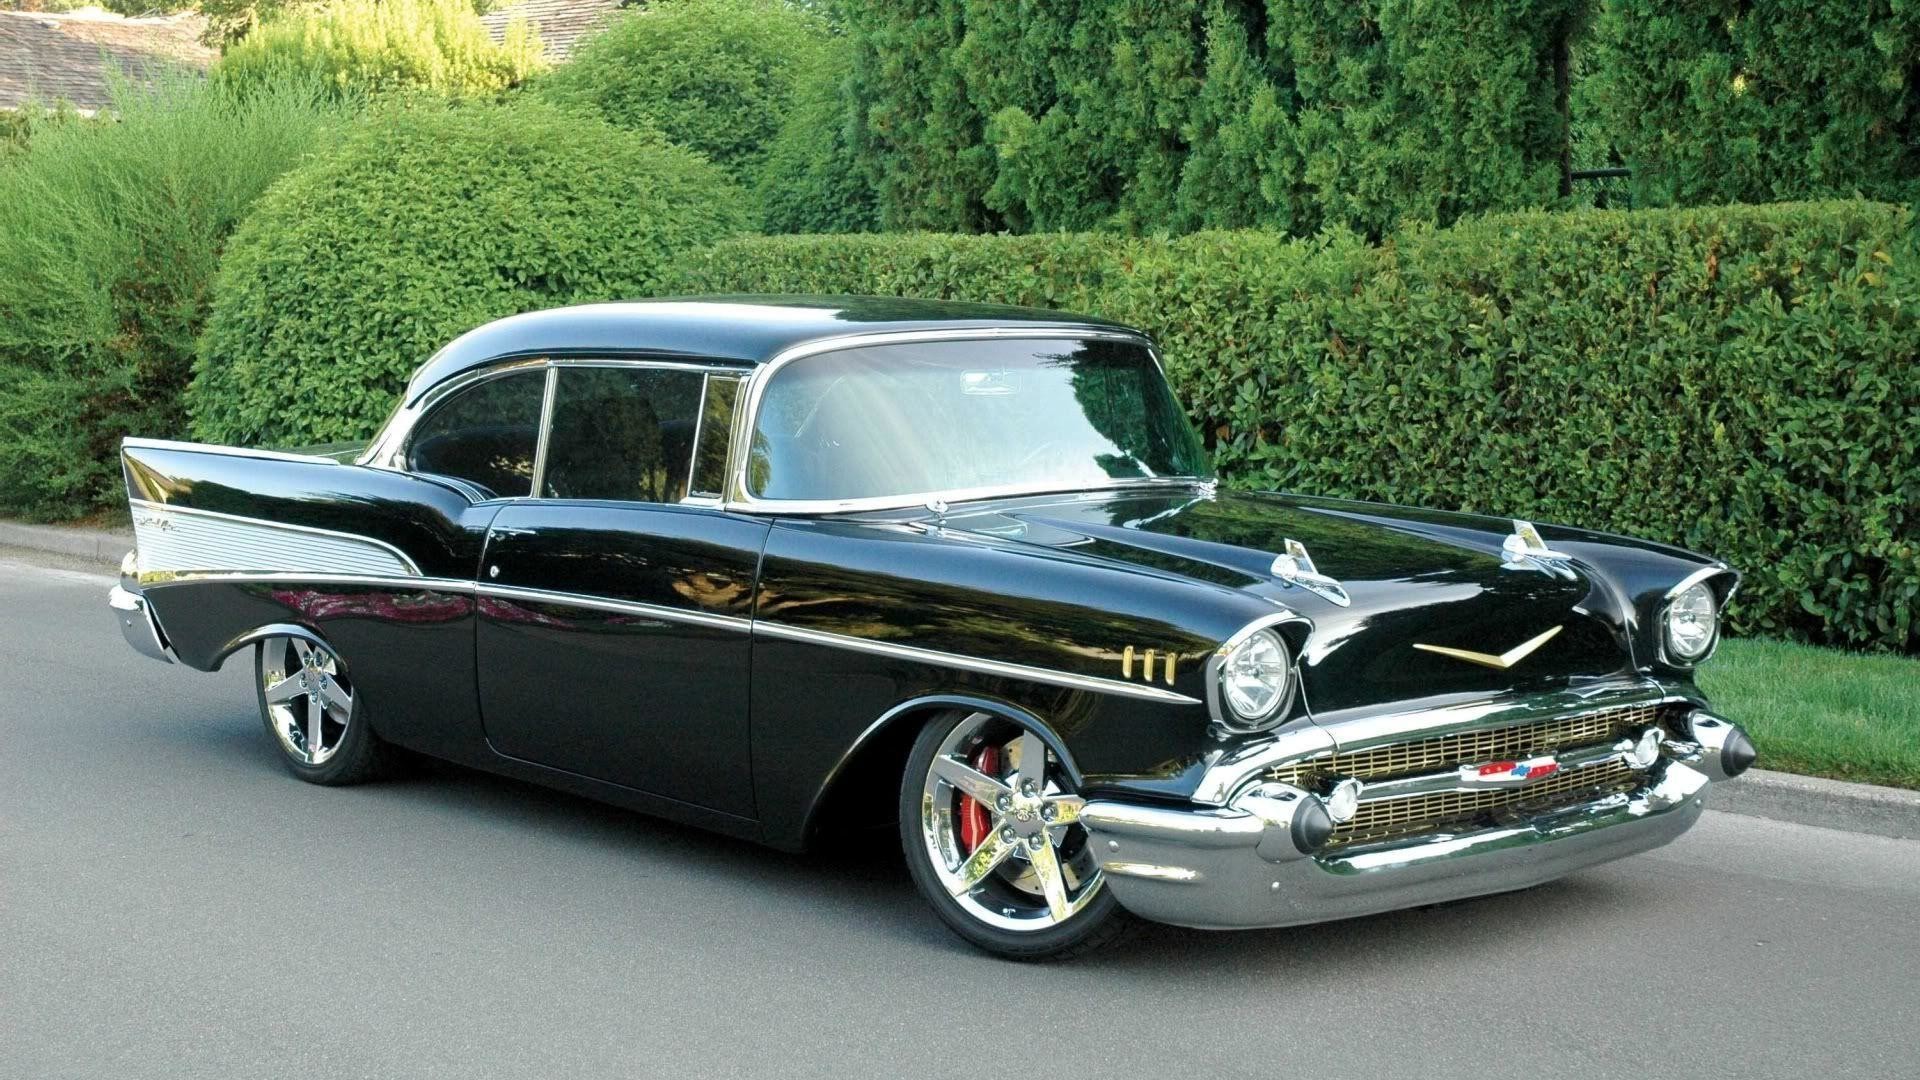 1920x1080 view image. Found on: 57-chevy-wallpaper